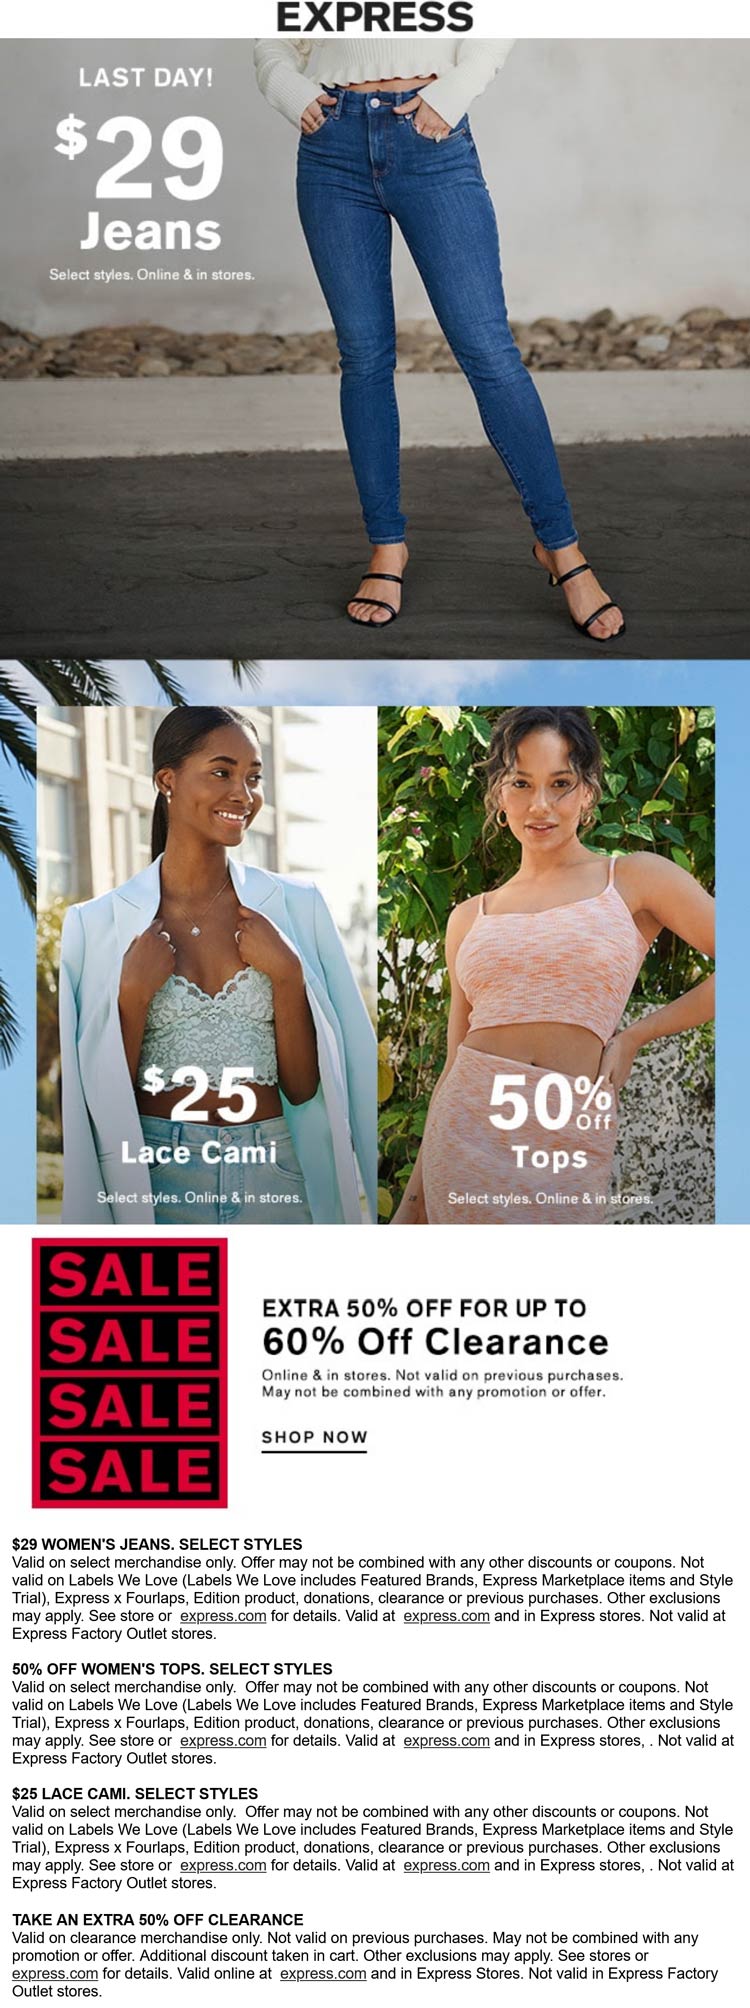 Express stores Coupon  50% off tops & more today at Express, ditto online #express 